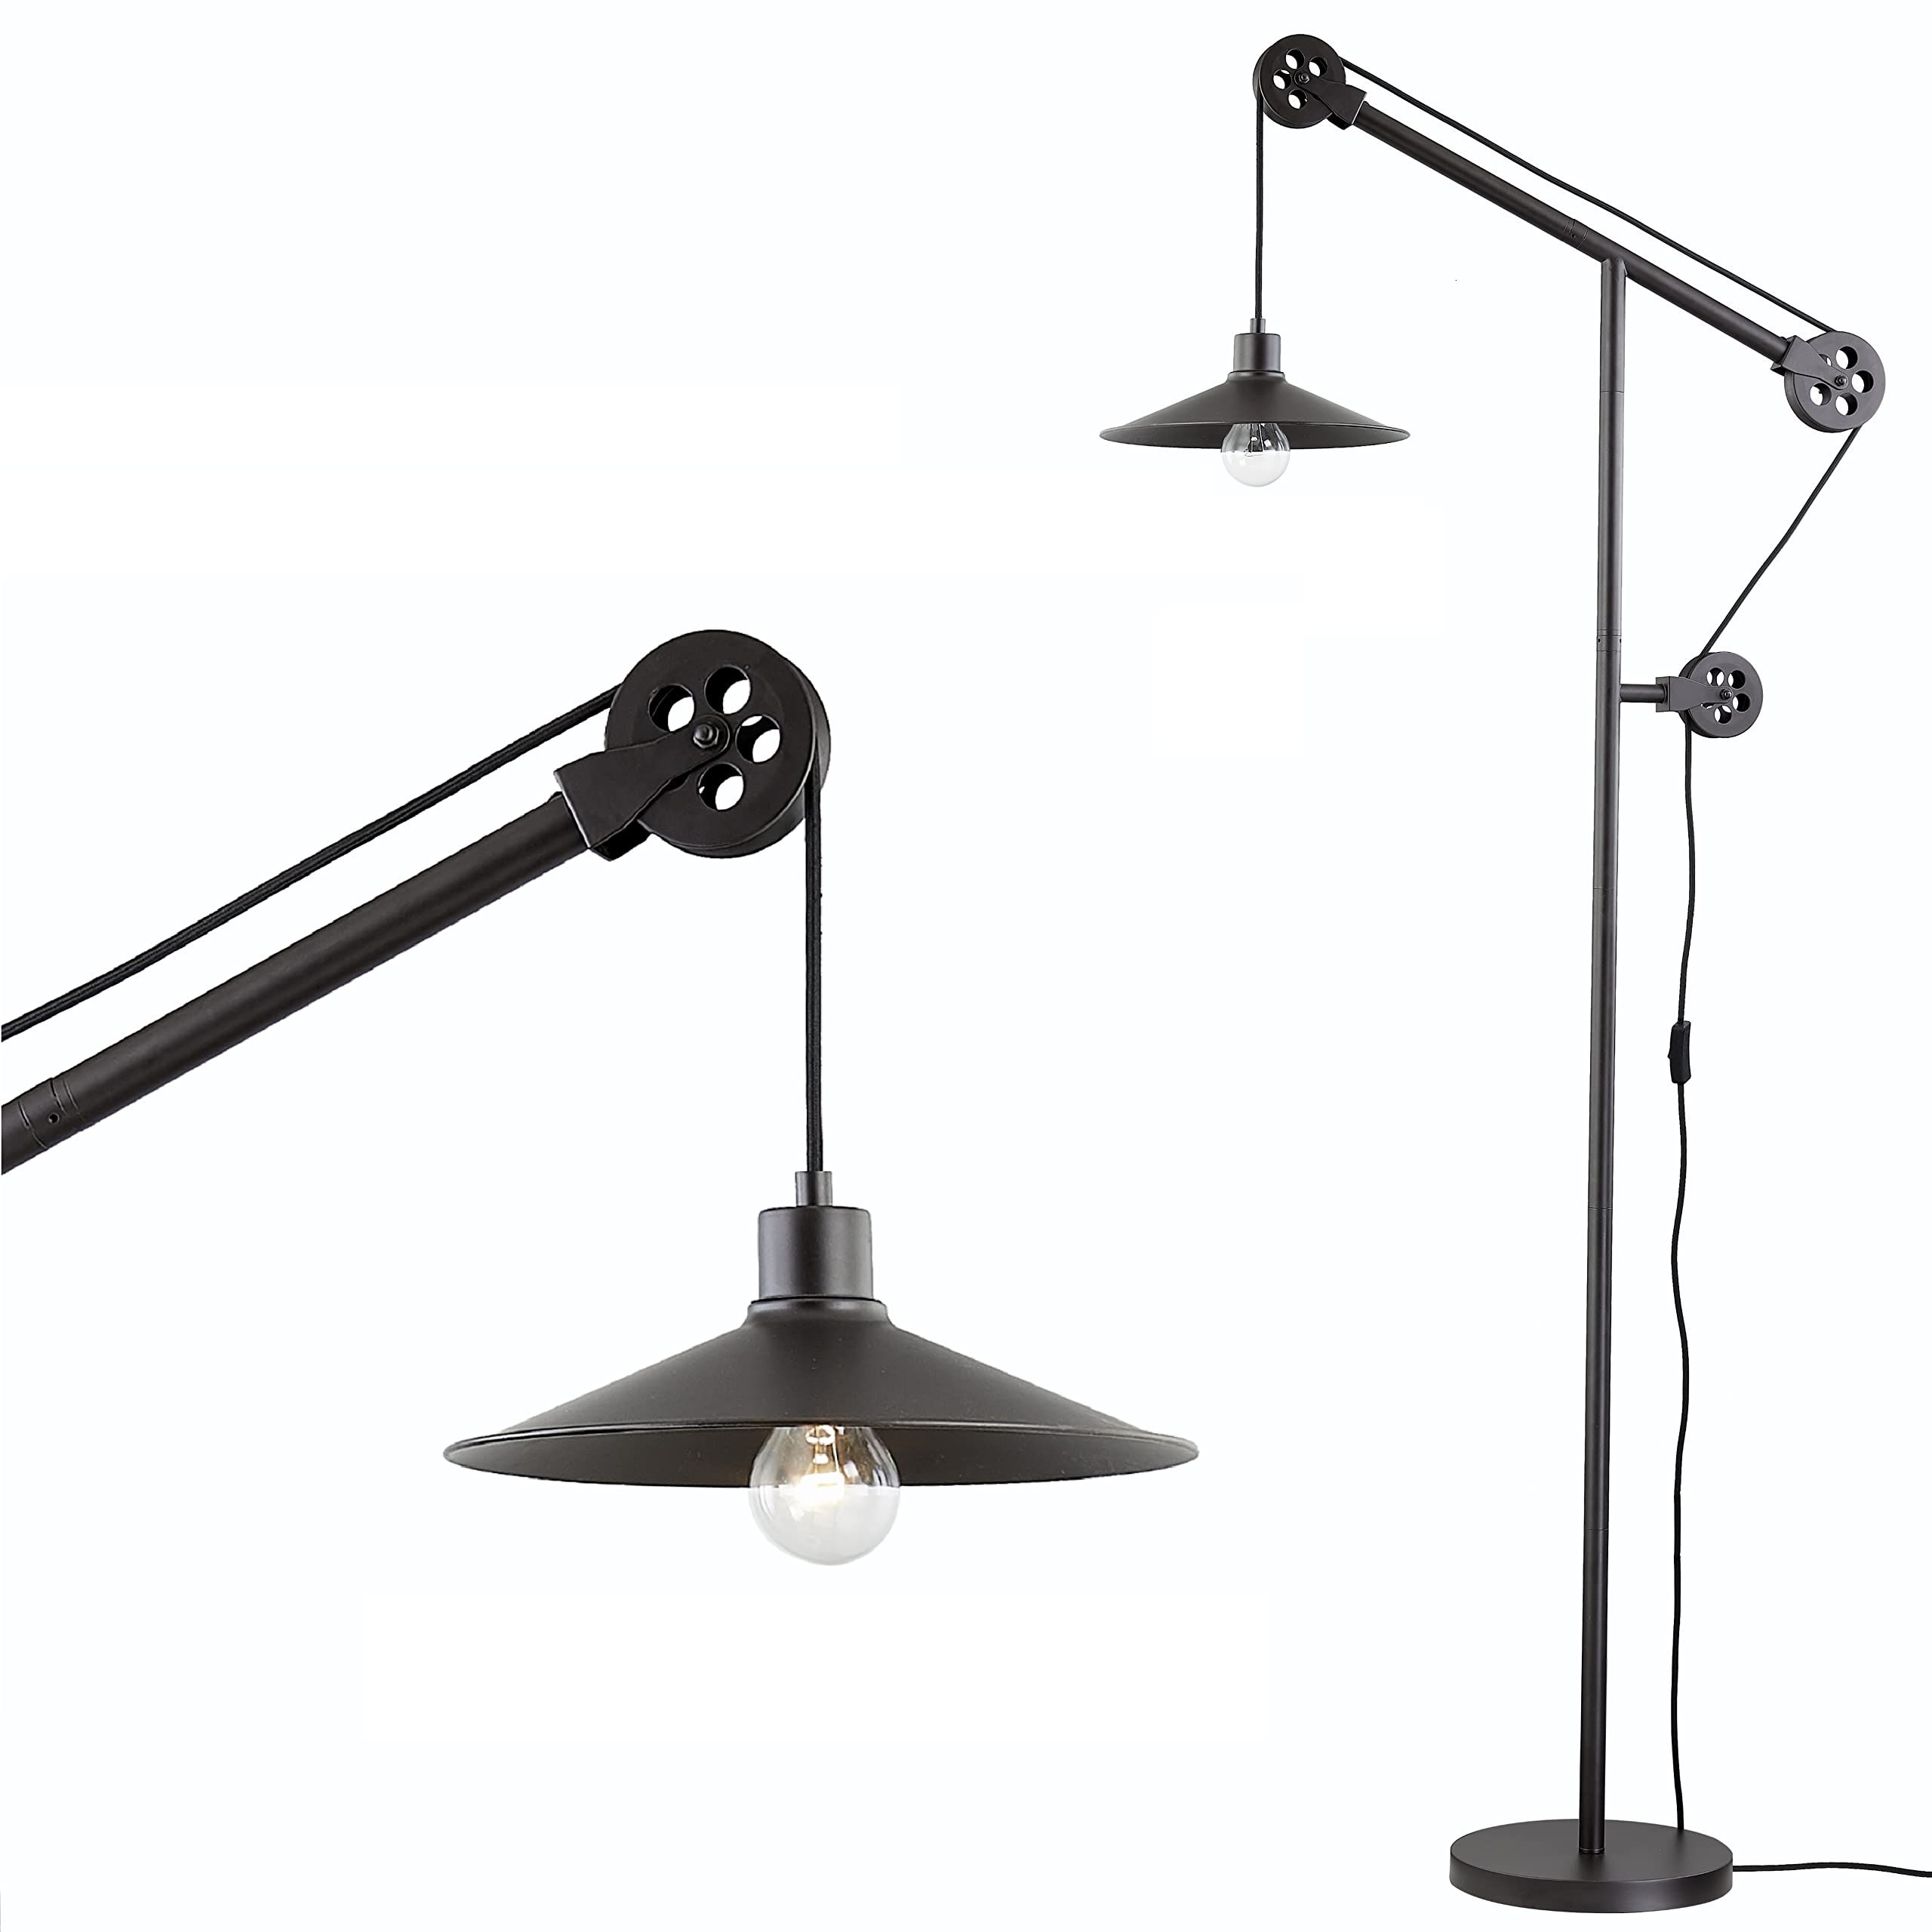 70 Inch Standing Lamps Inside Newest Pulley System Floor Lamp With Metal Shade, Adjustable Industrial Floor Lamps  For Living Room Rustic Modern Farmhouse Task Lamp, Vintage Tall Standing  Lamp For Bedroom Office,70 Inch Blackened Bronze – – Amazon (View 3 of 10)